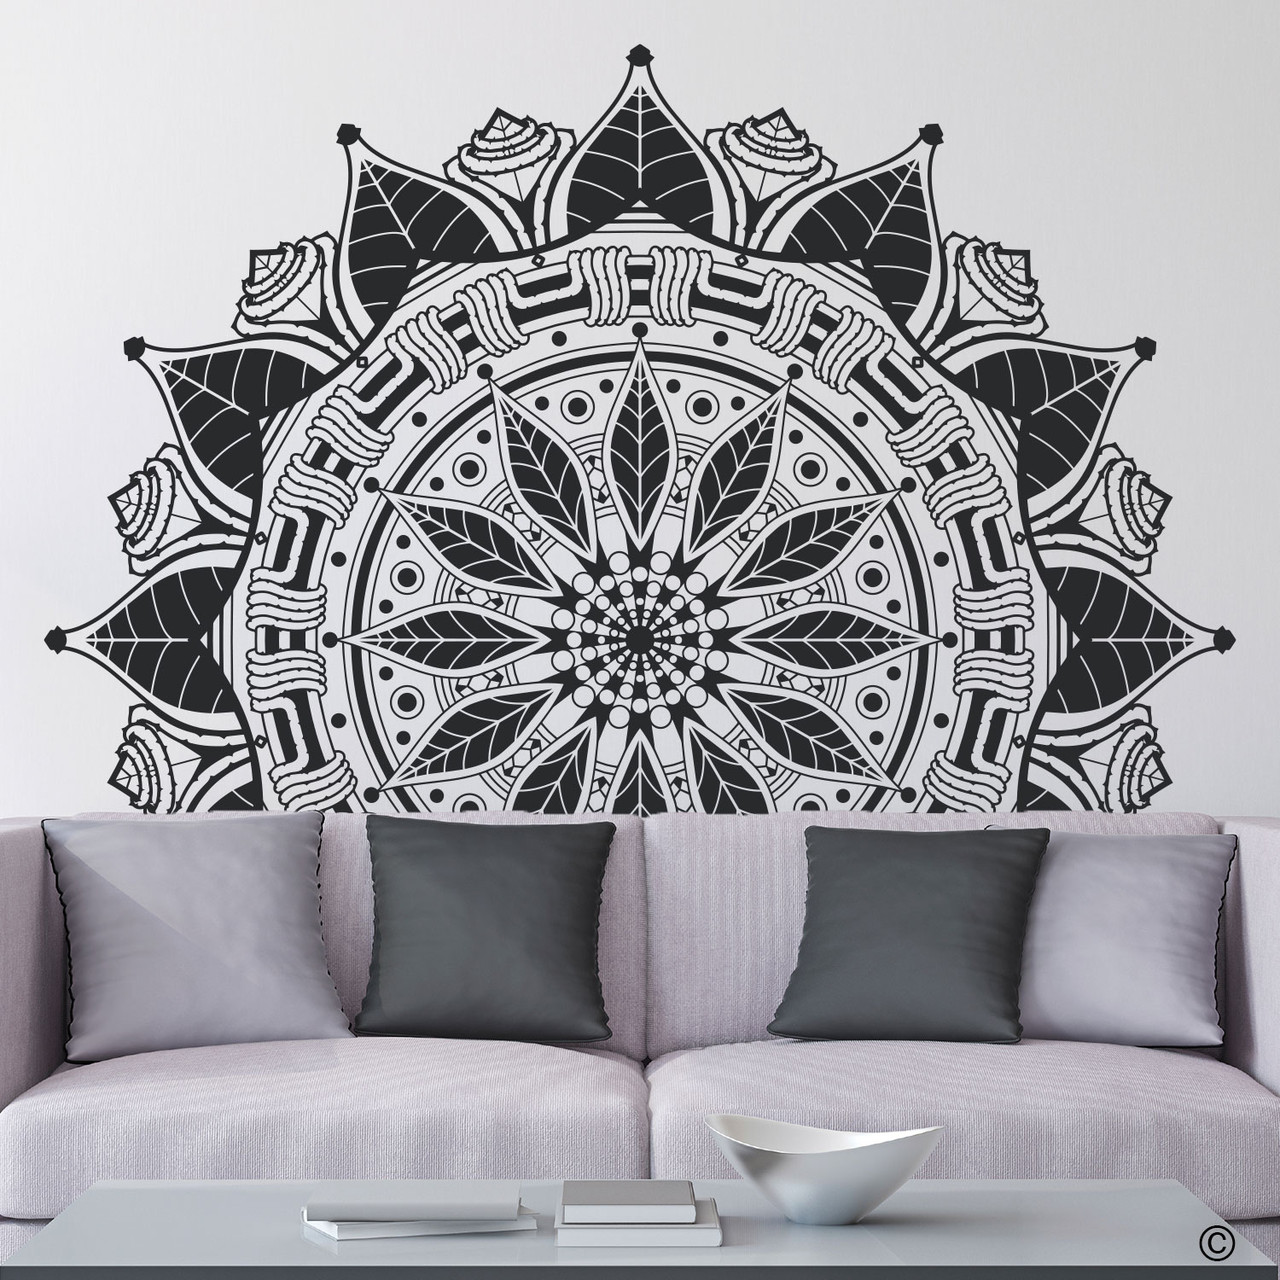 The Francis mandala wall decal shown here behind a couch in the black vinyl color.